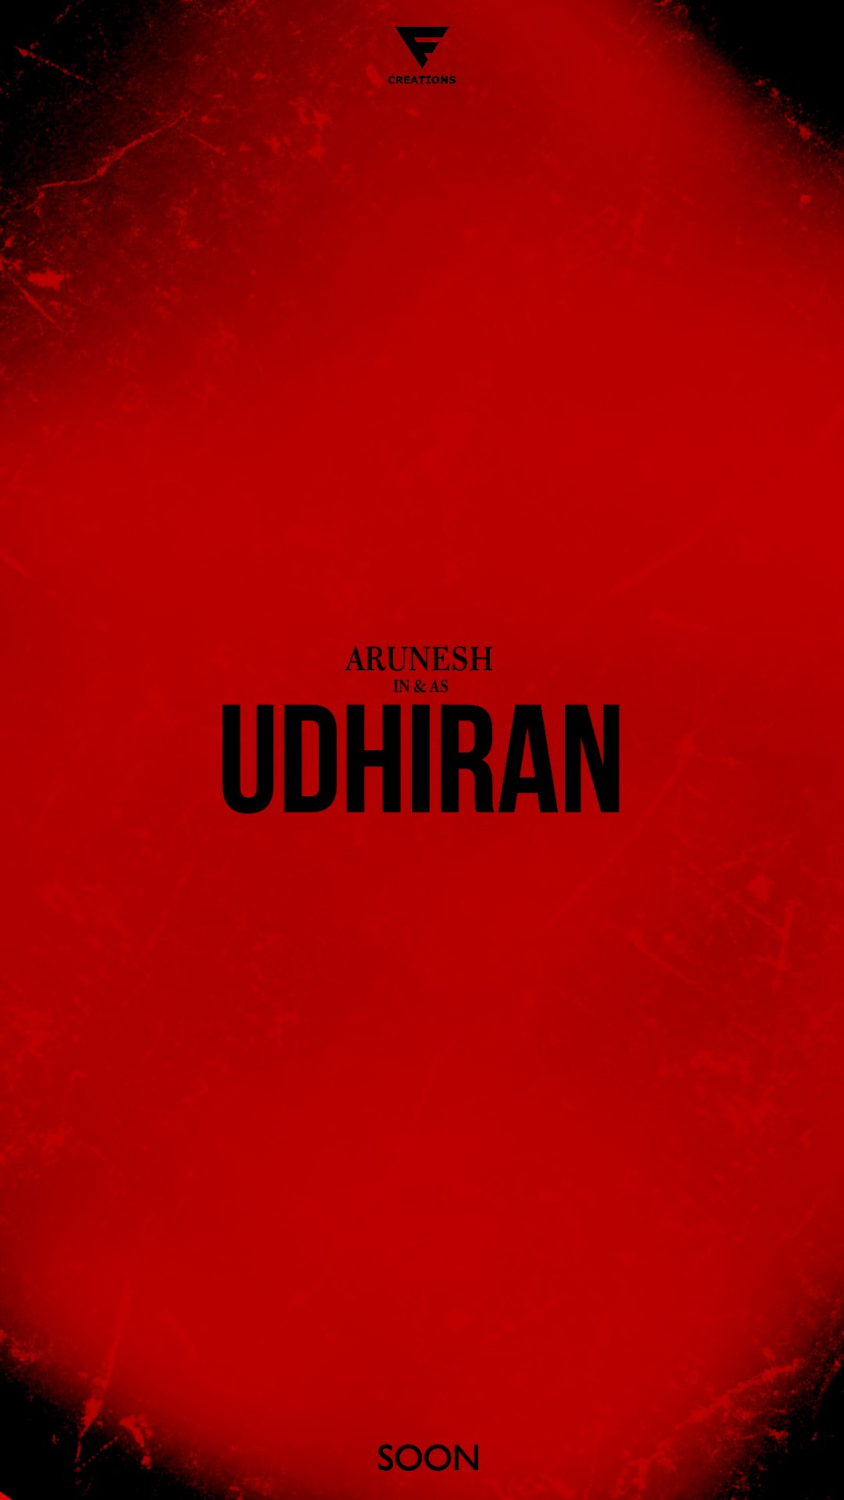 Extra Large Movie Poster Image for Udhiran